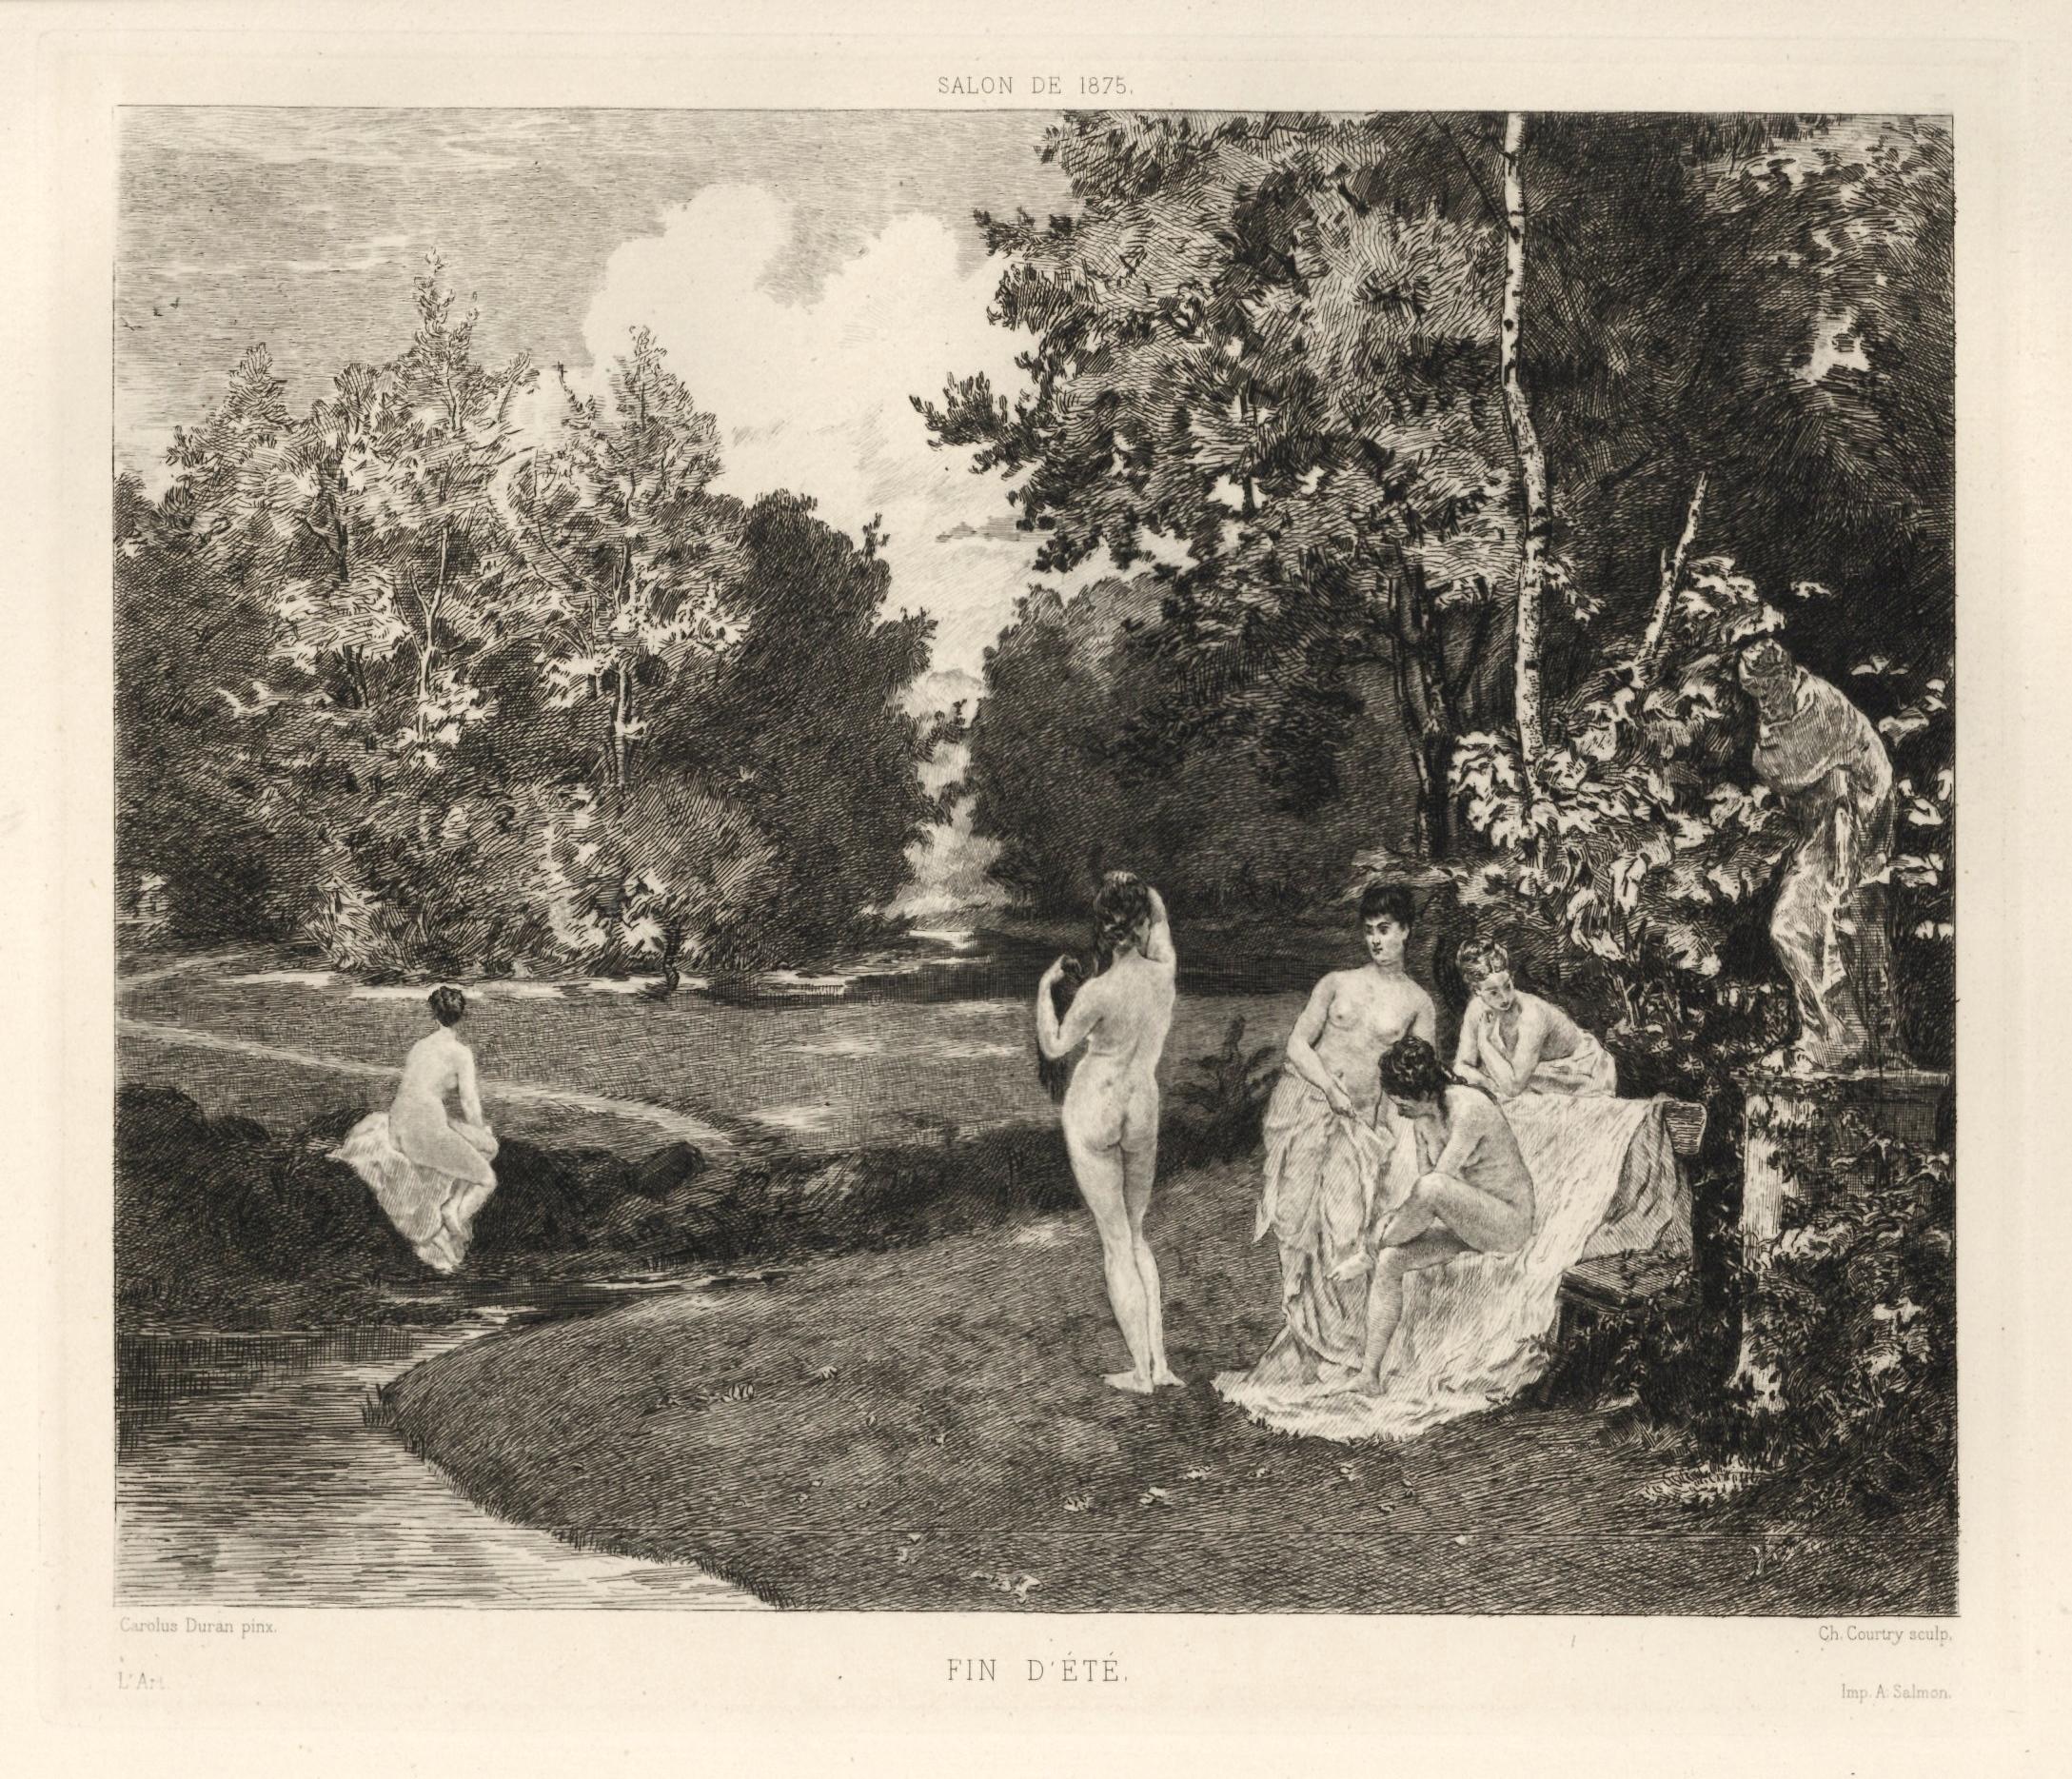 "Fin d'Ete" etching - Print by Charles Courtry